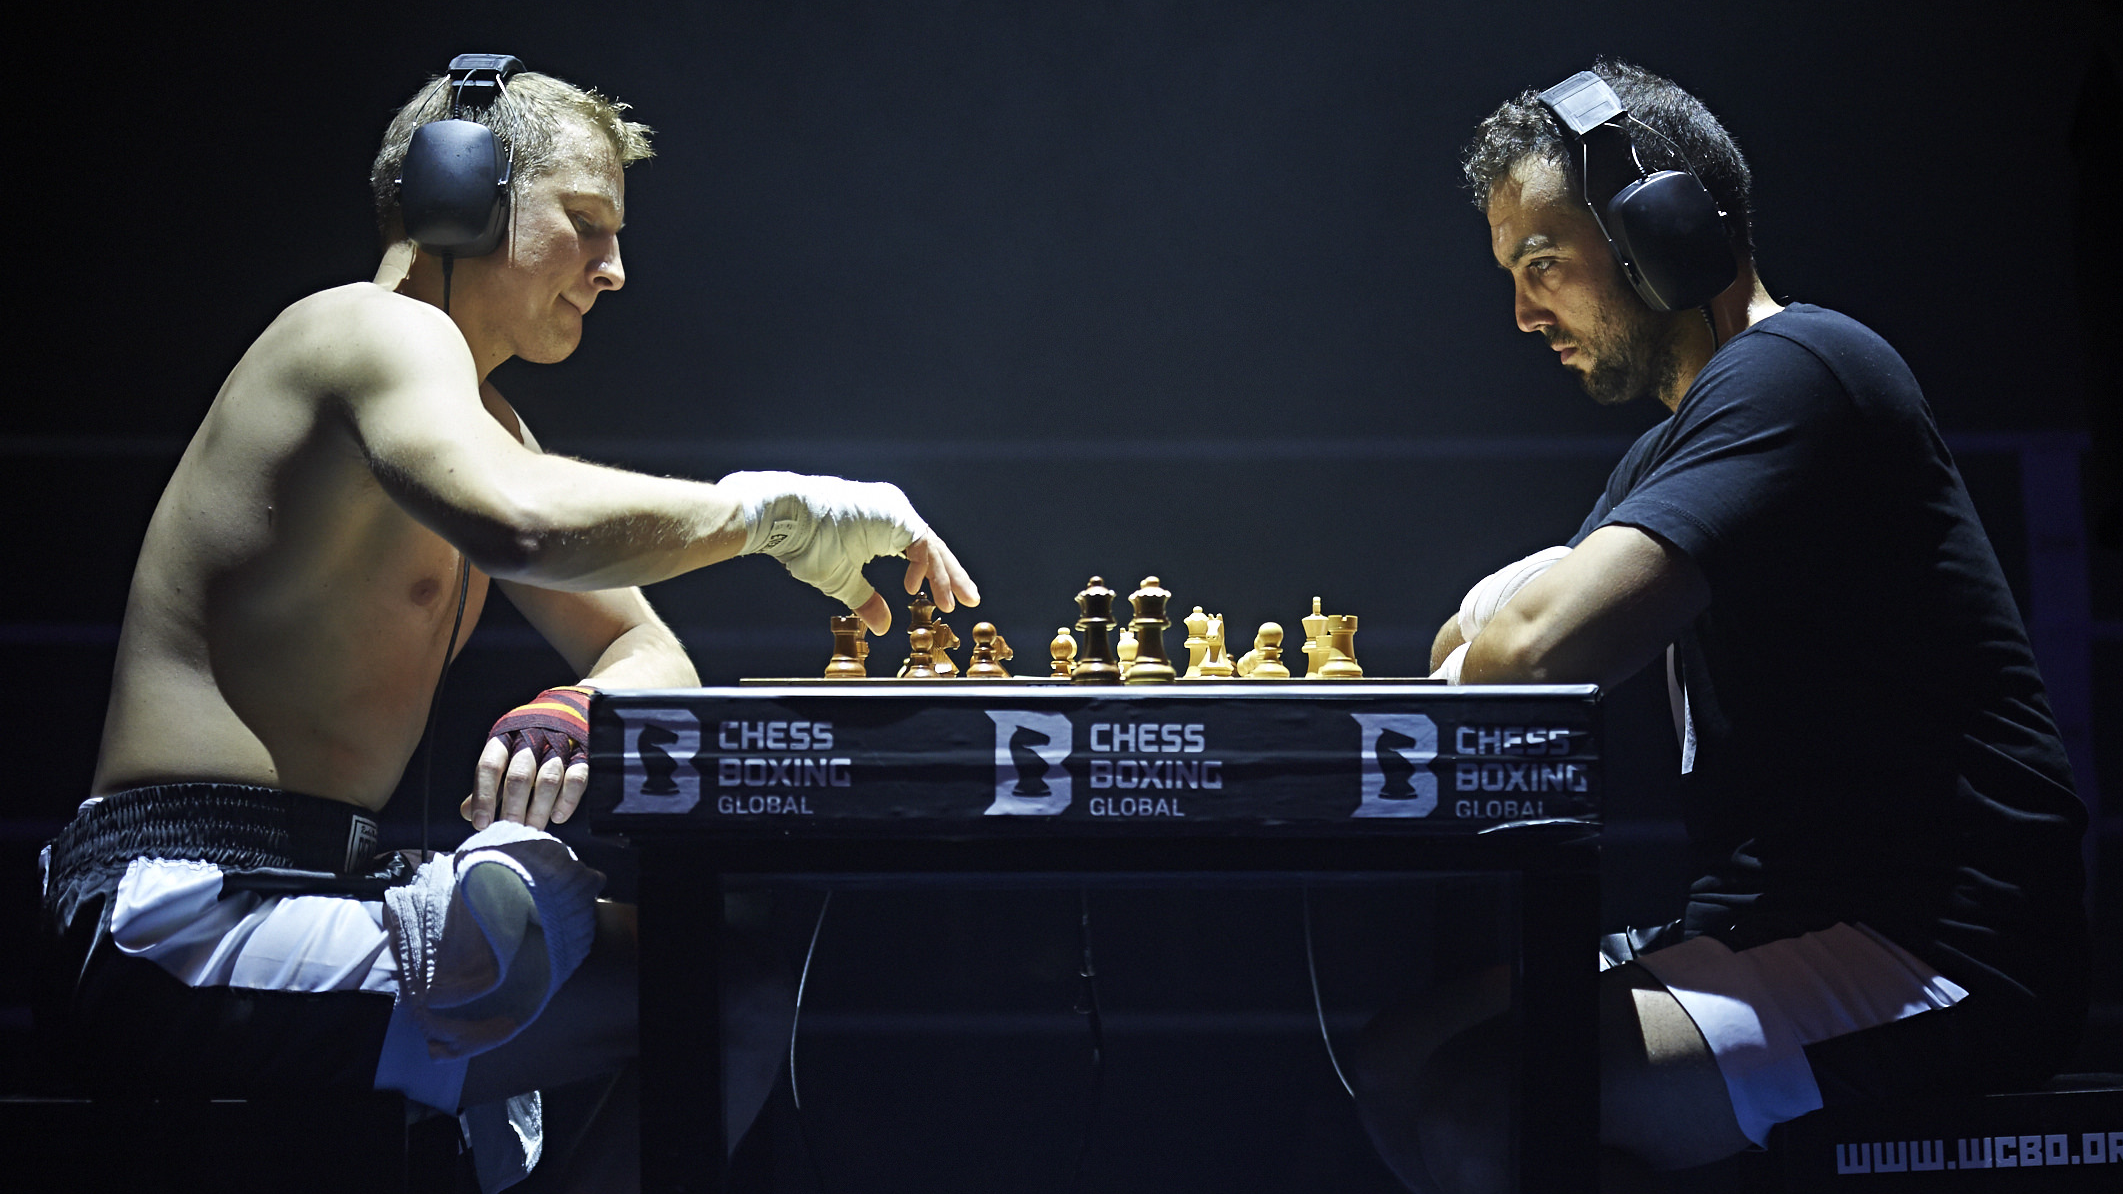 What is Chessboxing? 